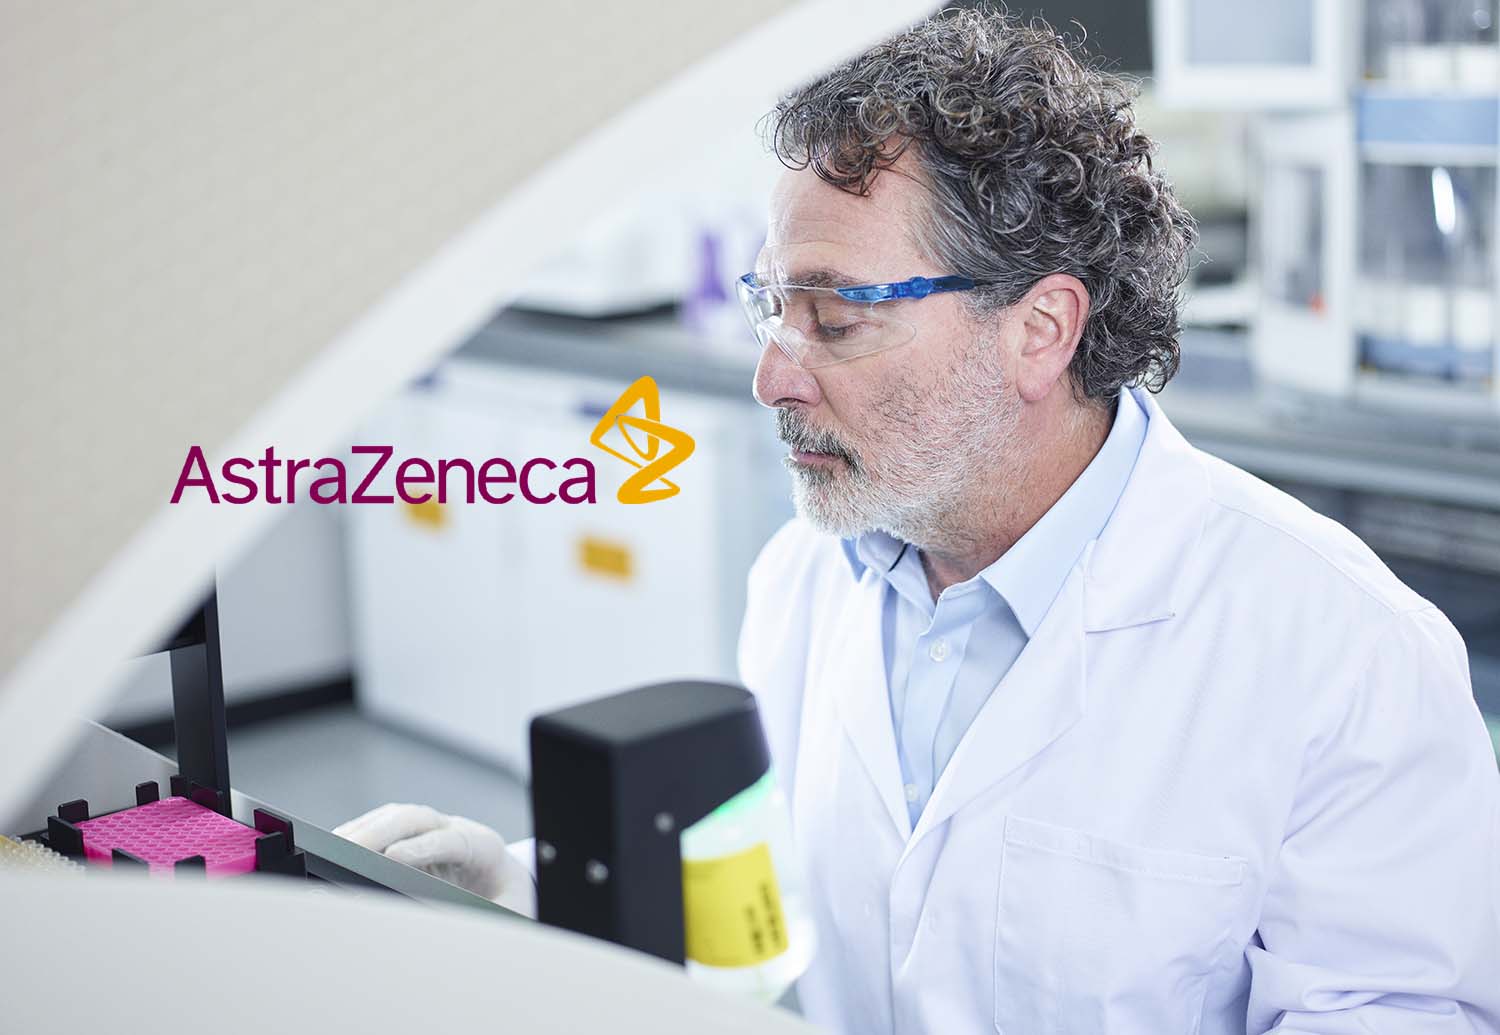 AstraZeneca COVID-19 vaccines showed similar and favorable safety profiles in a population-based cohort study of over a million people